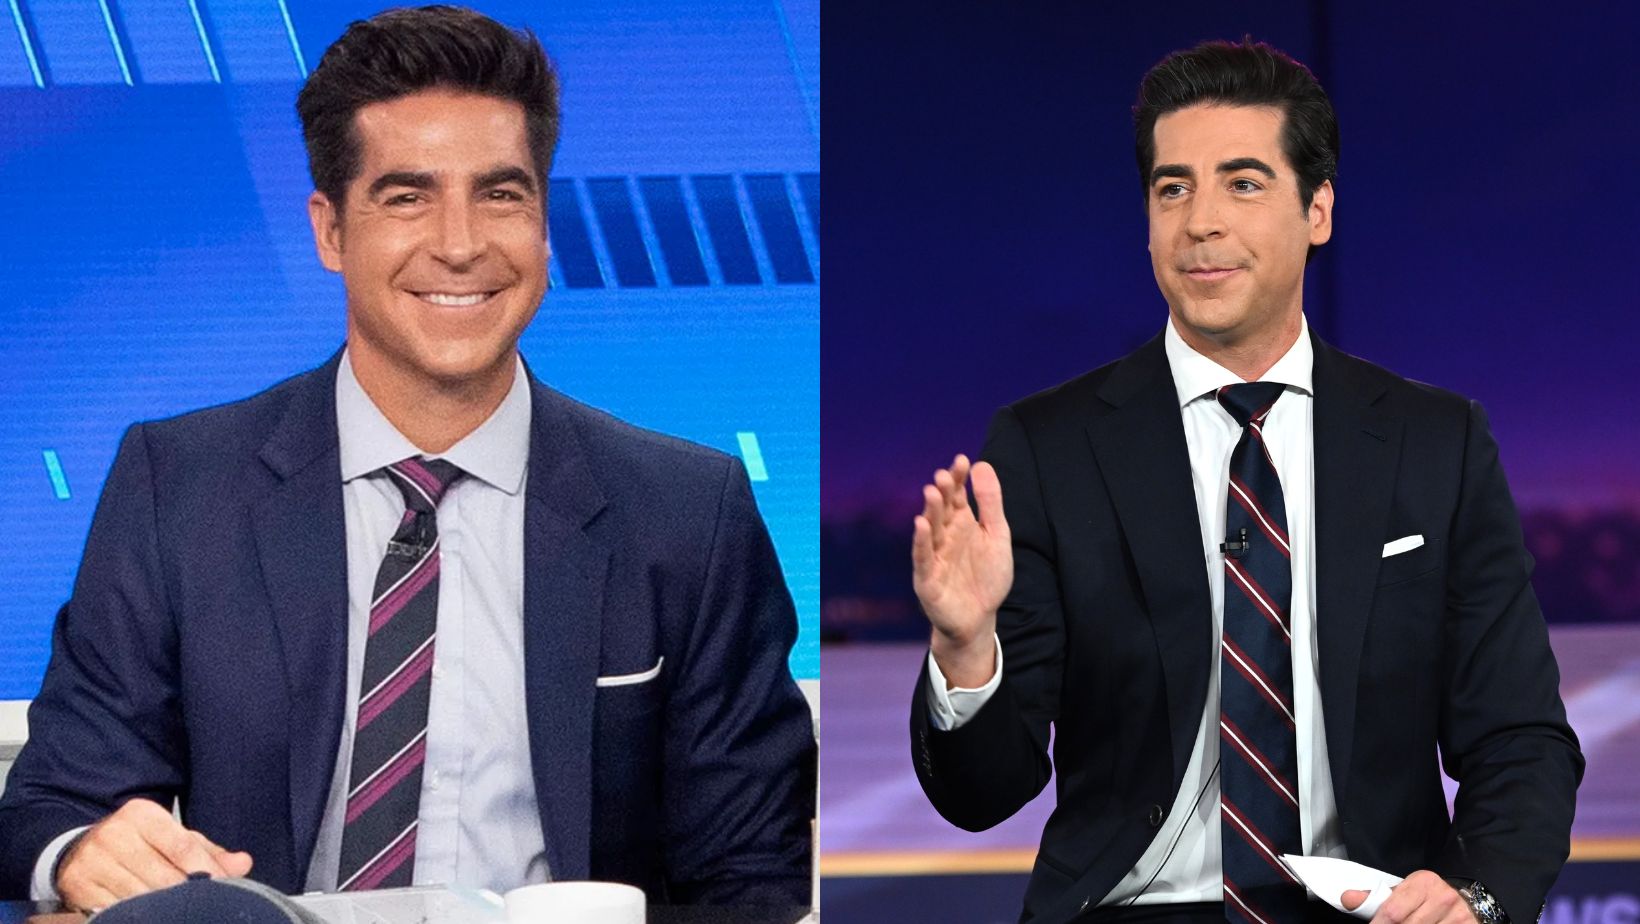 What ethnicity is Jesse Watters